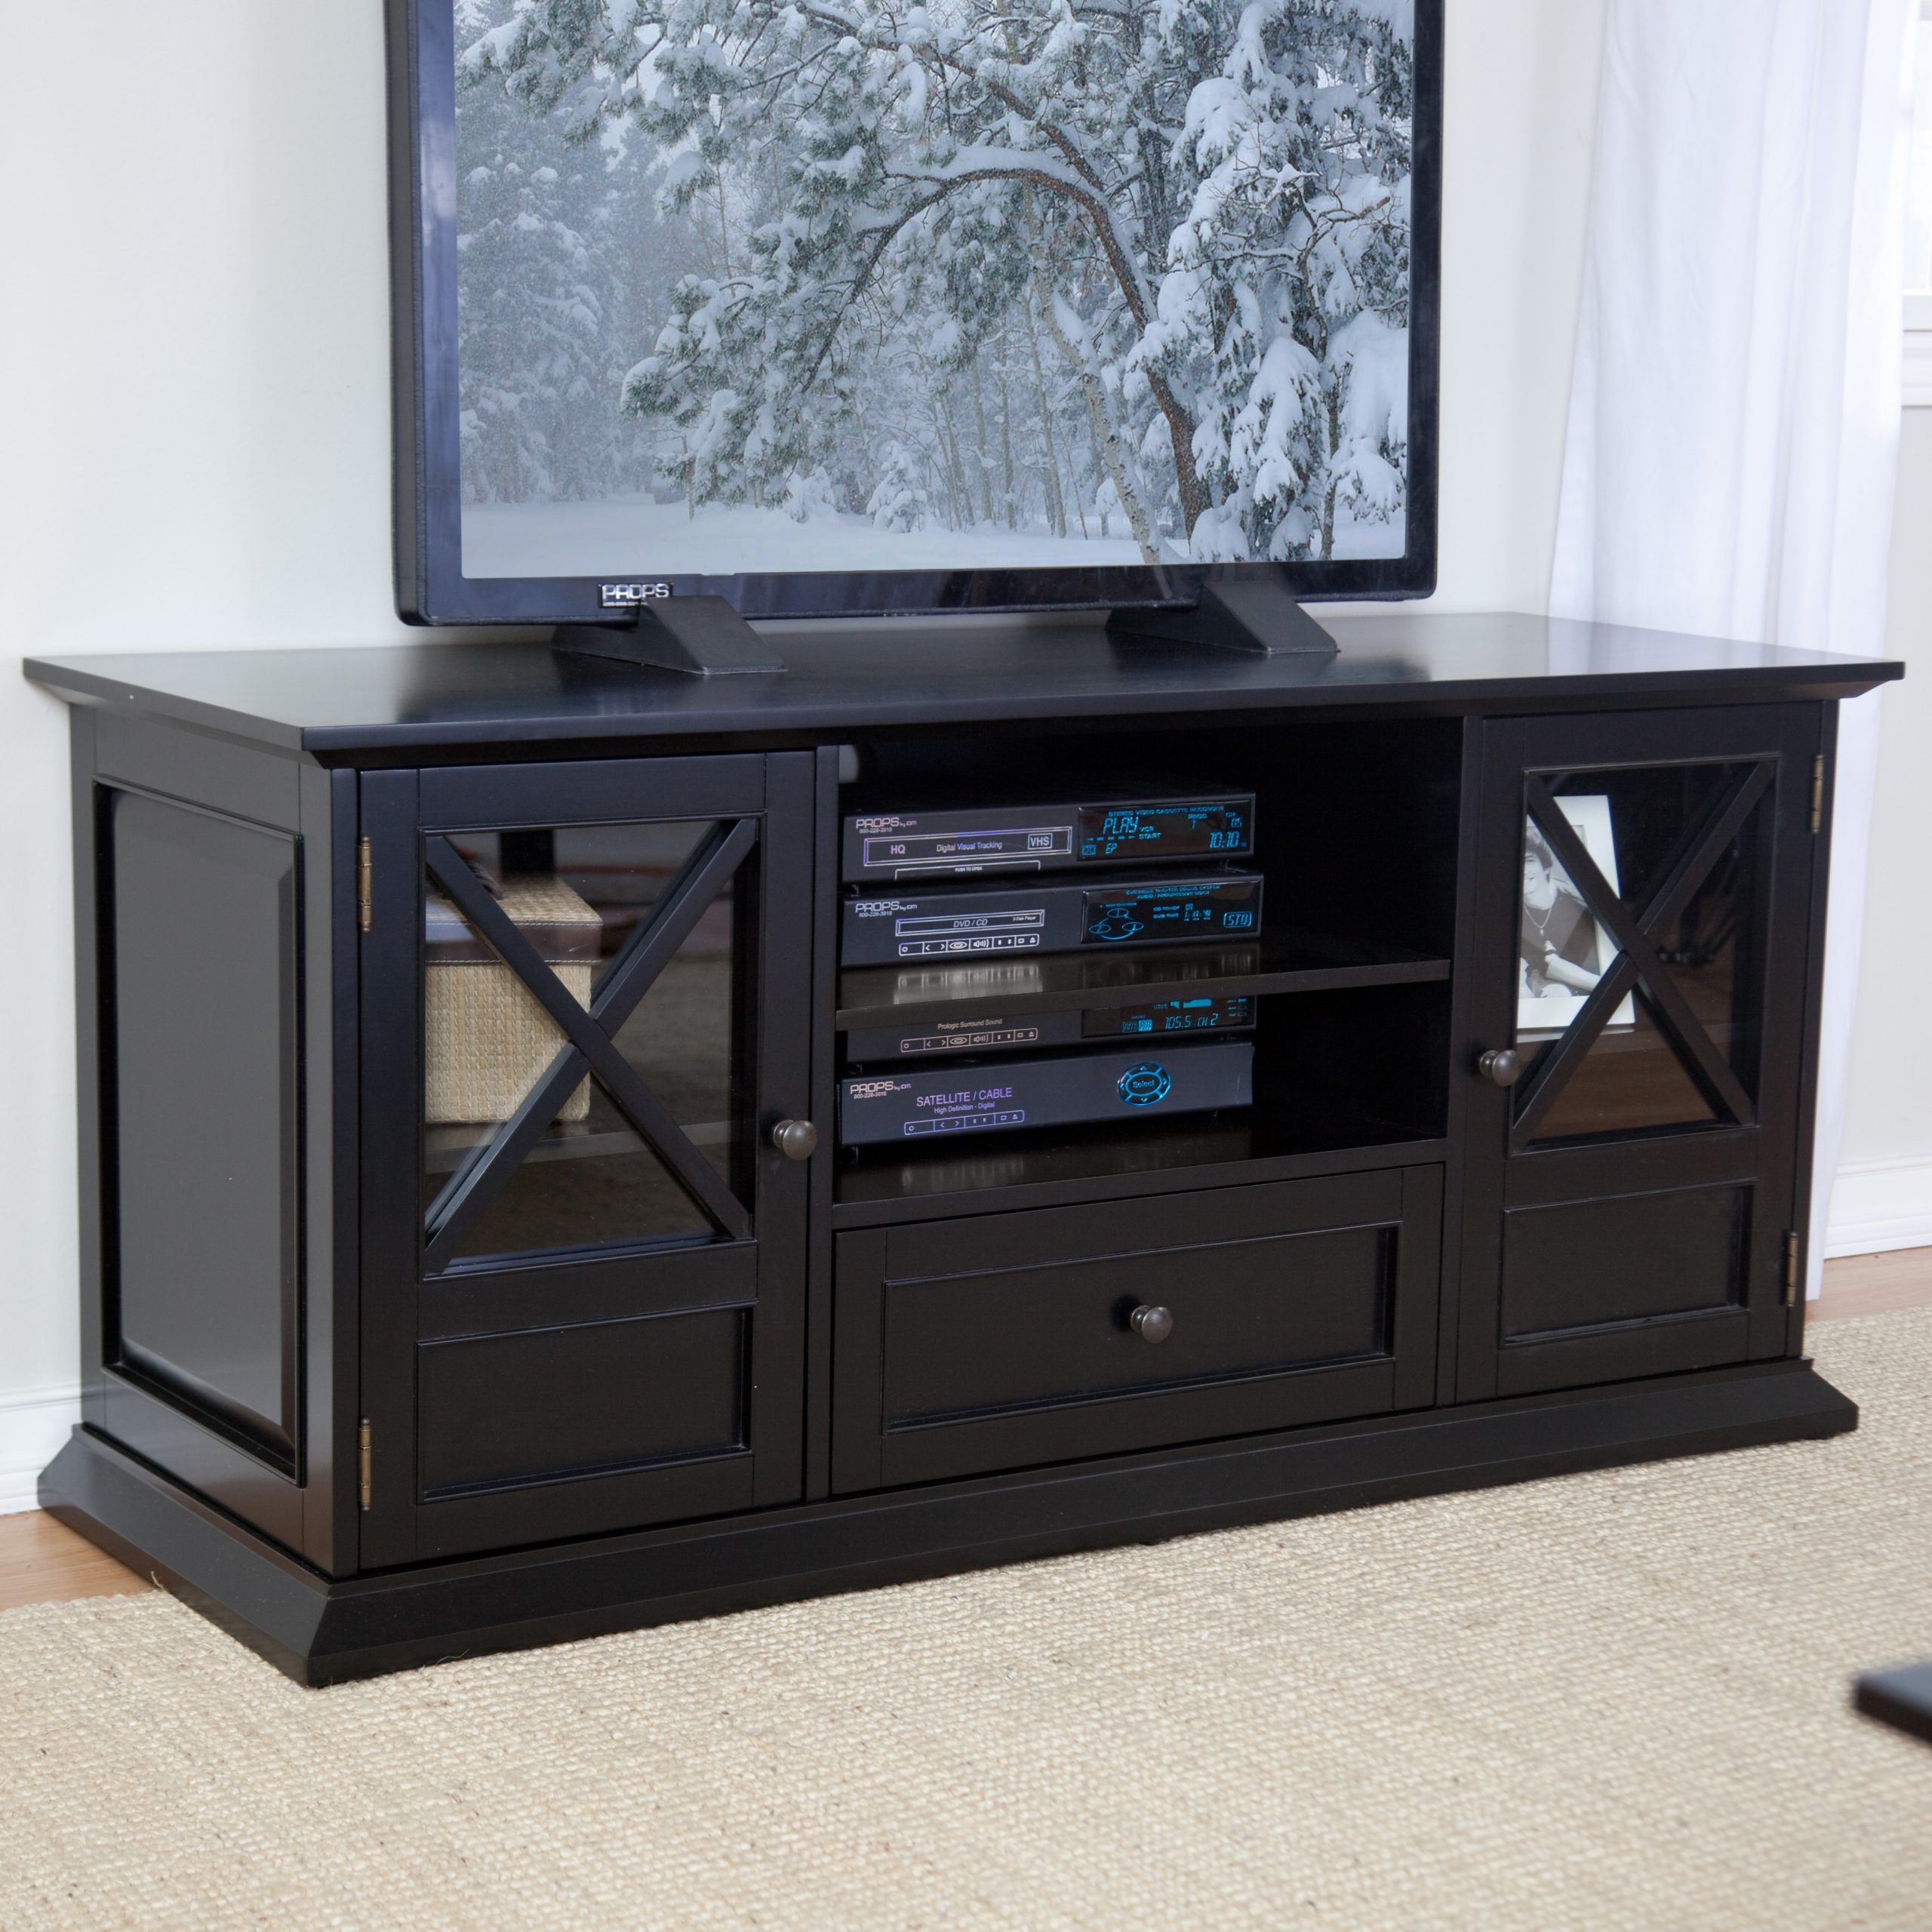 Belham Living Hampton 55 Inch Tv Stand – Black At Hayneedle Inside Greenwich Wide Tv Stands (View 4 of 15)